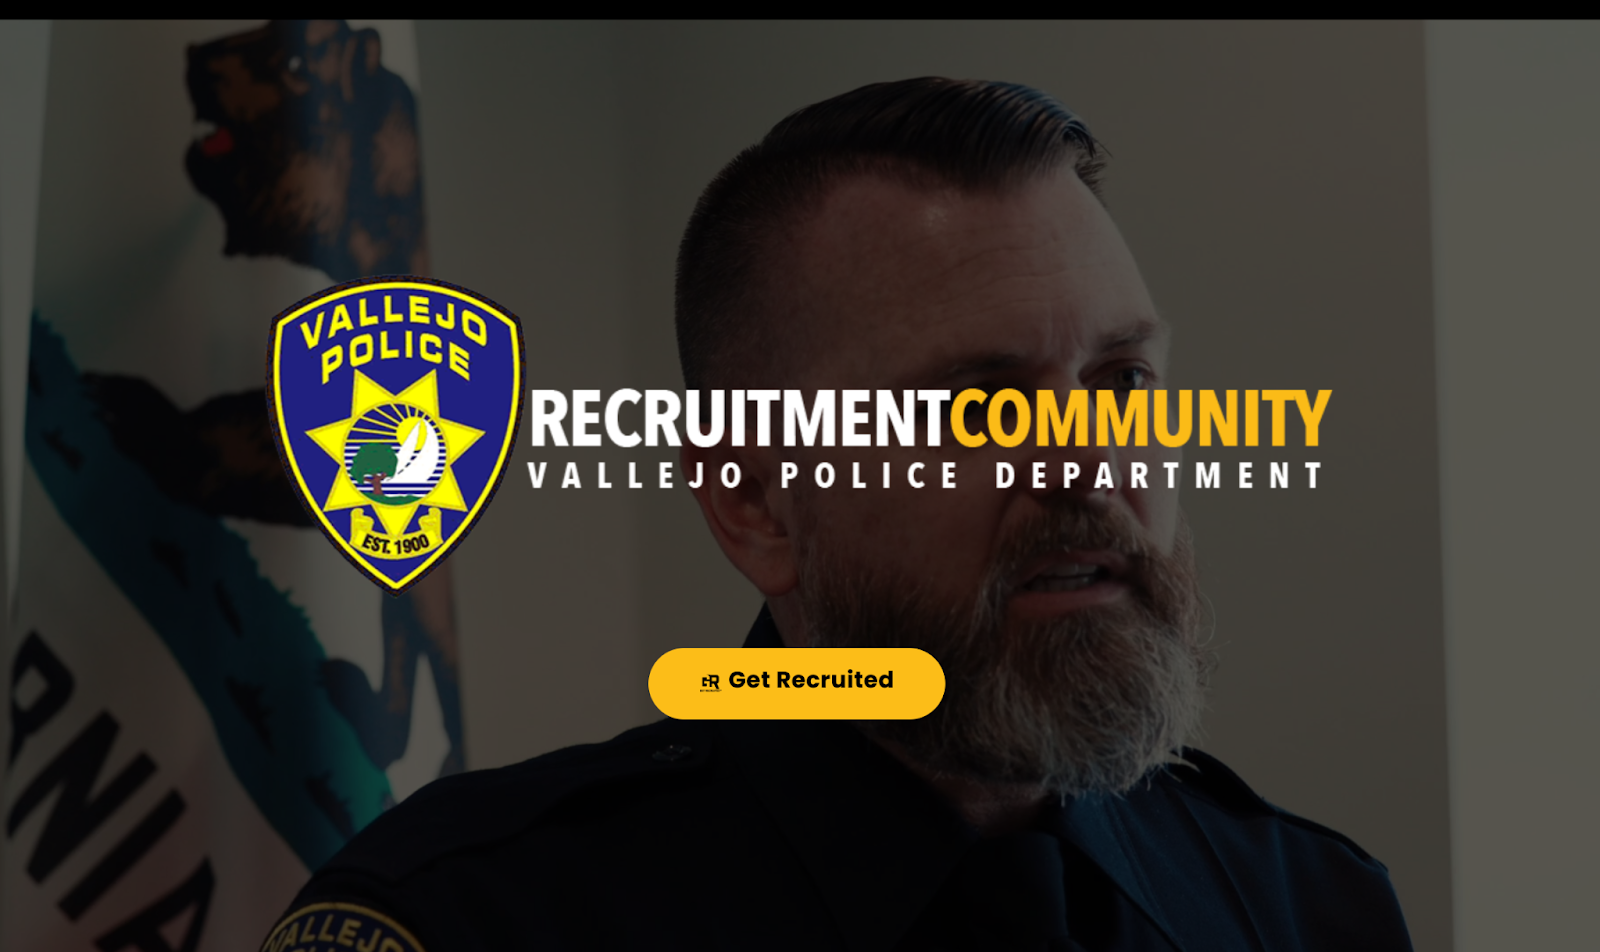 A screenshot featuring the Vallejo police logo with the words "Recruitment Community: Vallejo Police Department" with an image behind it of a white man with a long grey beard in a blue police uniform. 